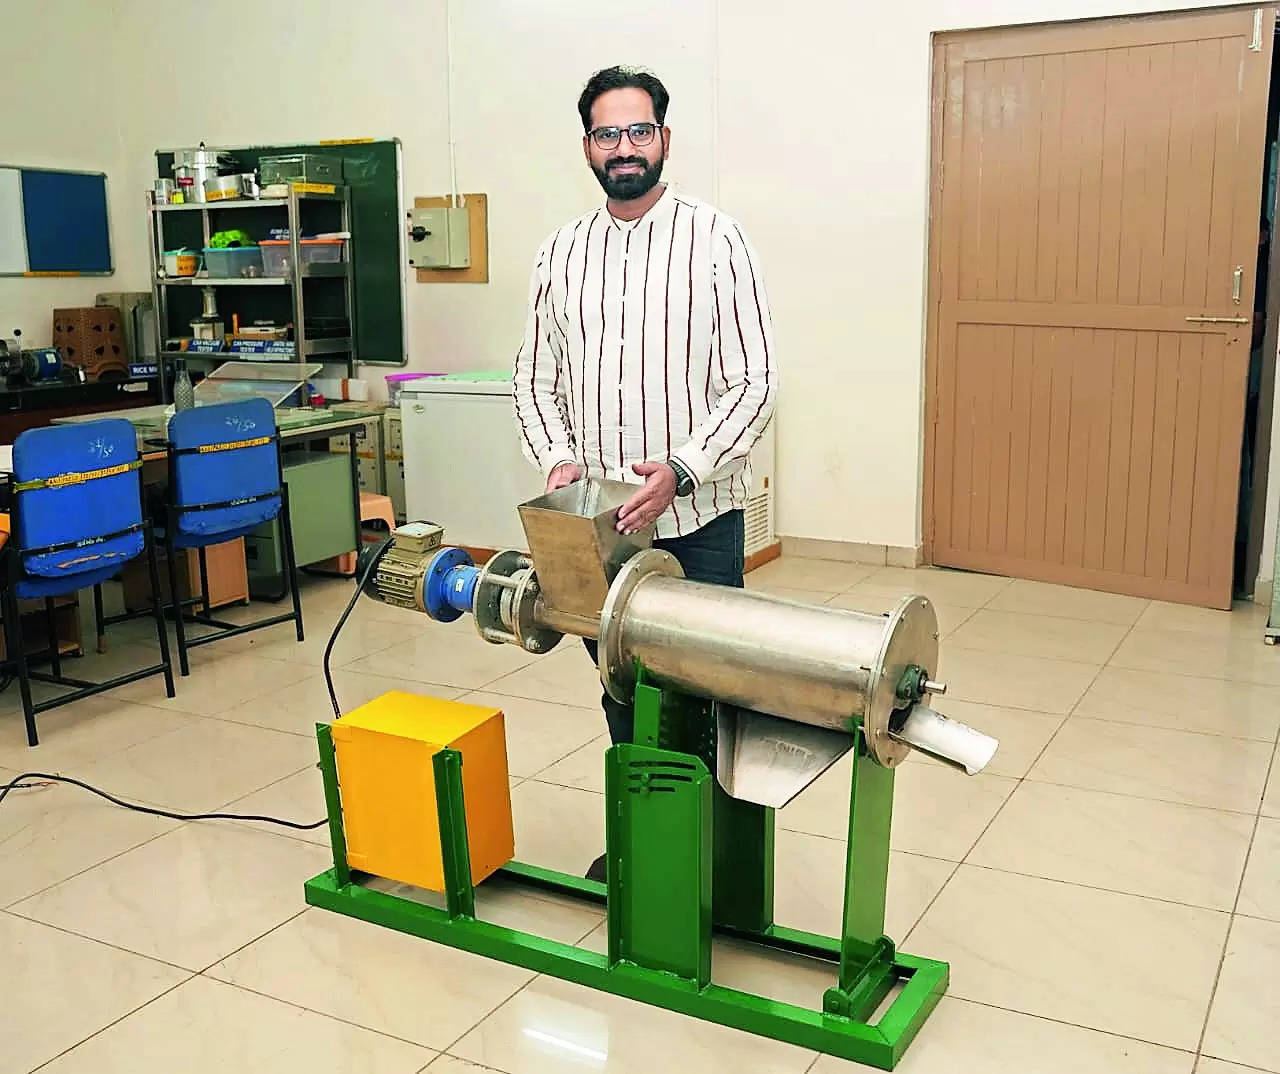 This device to revolutionize processing seeded fruits